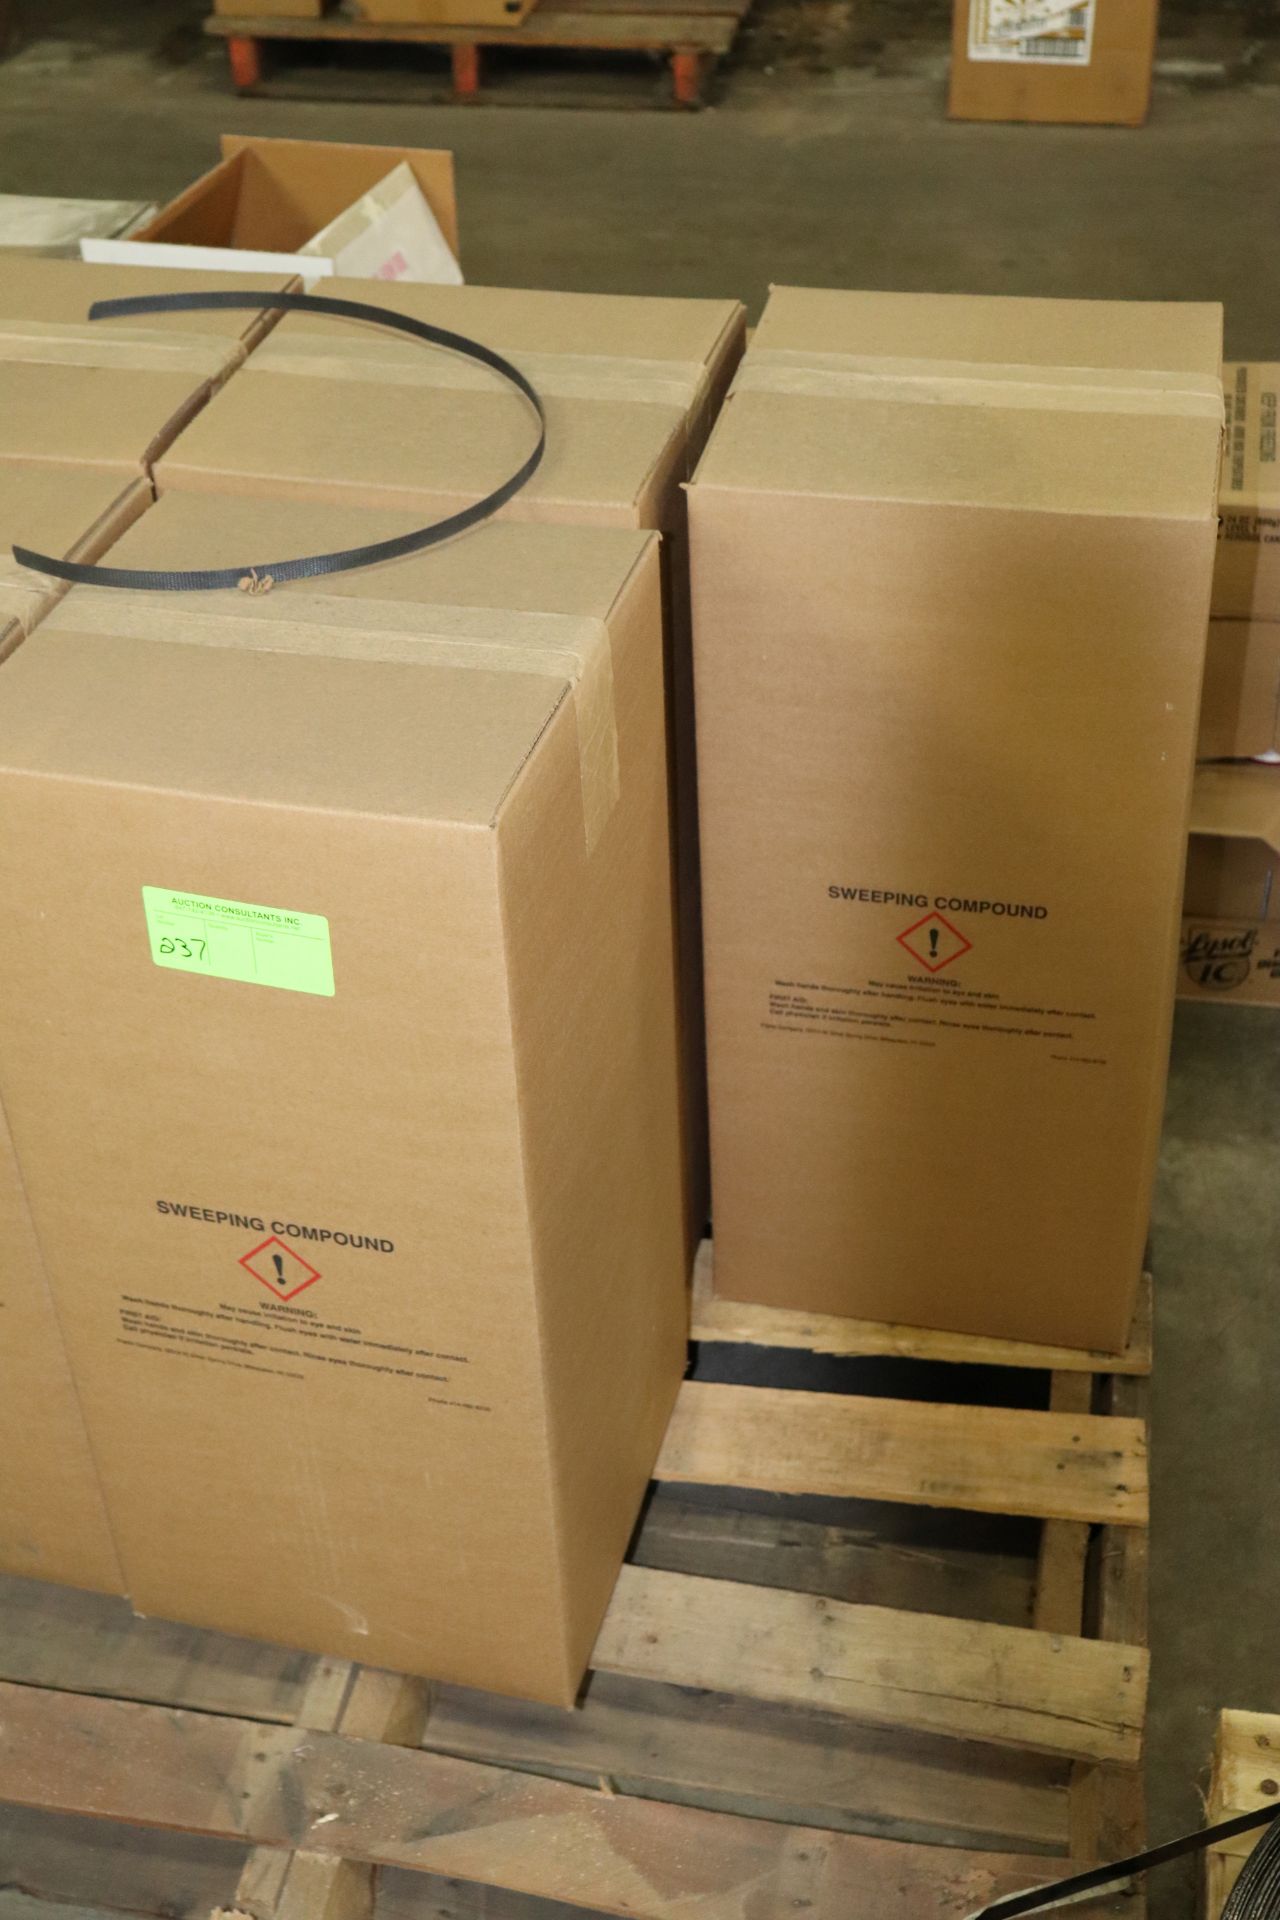 Three boxes of sweeping compound